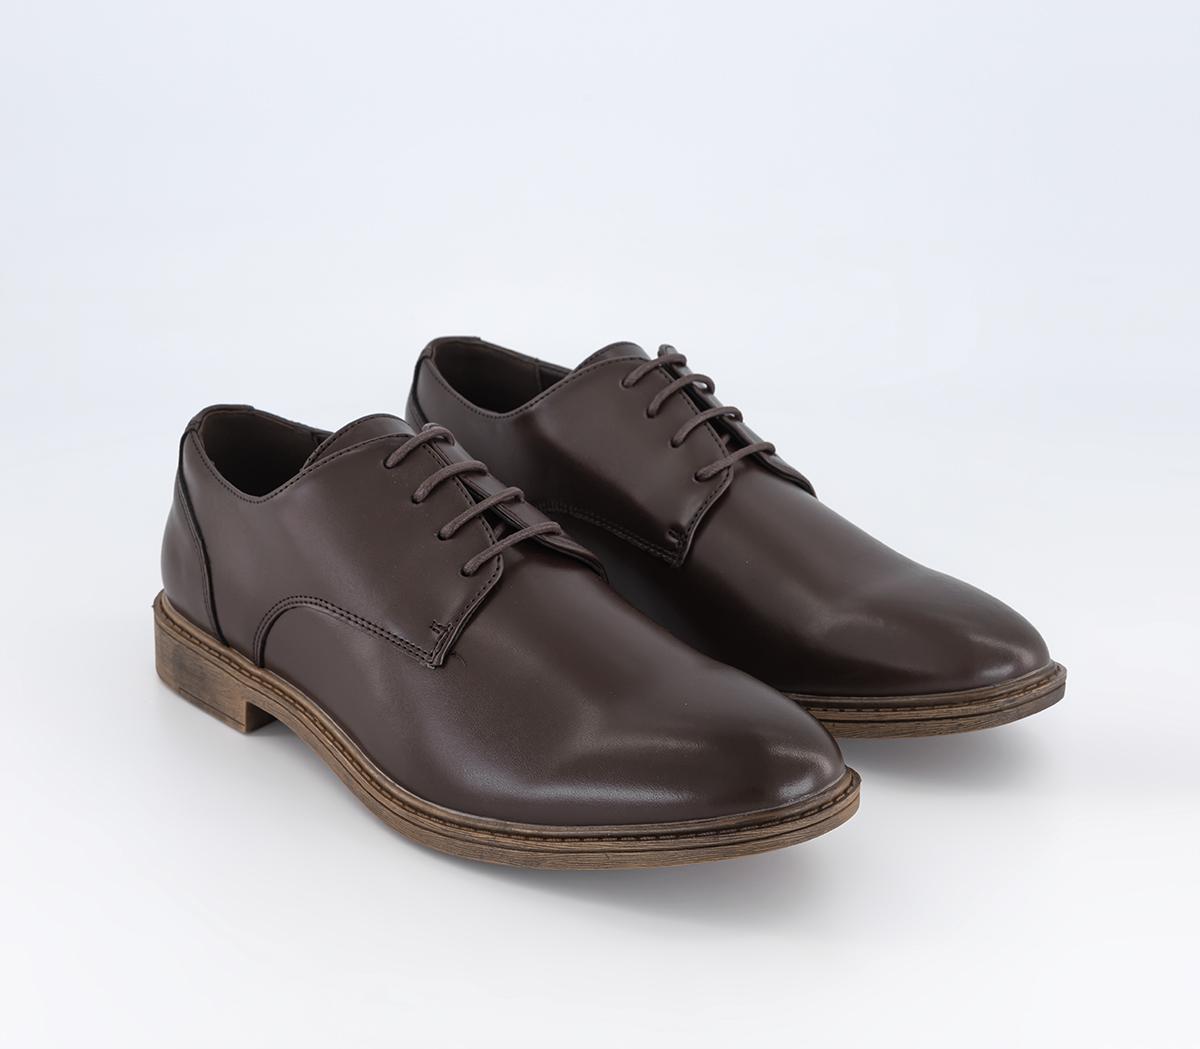 OFFICE Curton Leather Derby Shoes Brown Leather - Men's Casual Shoes